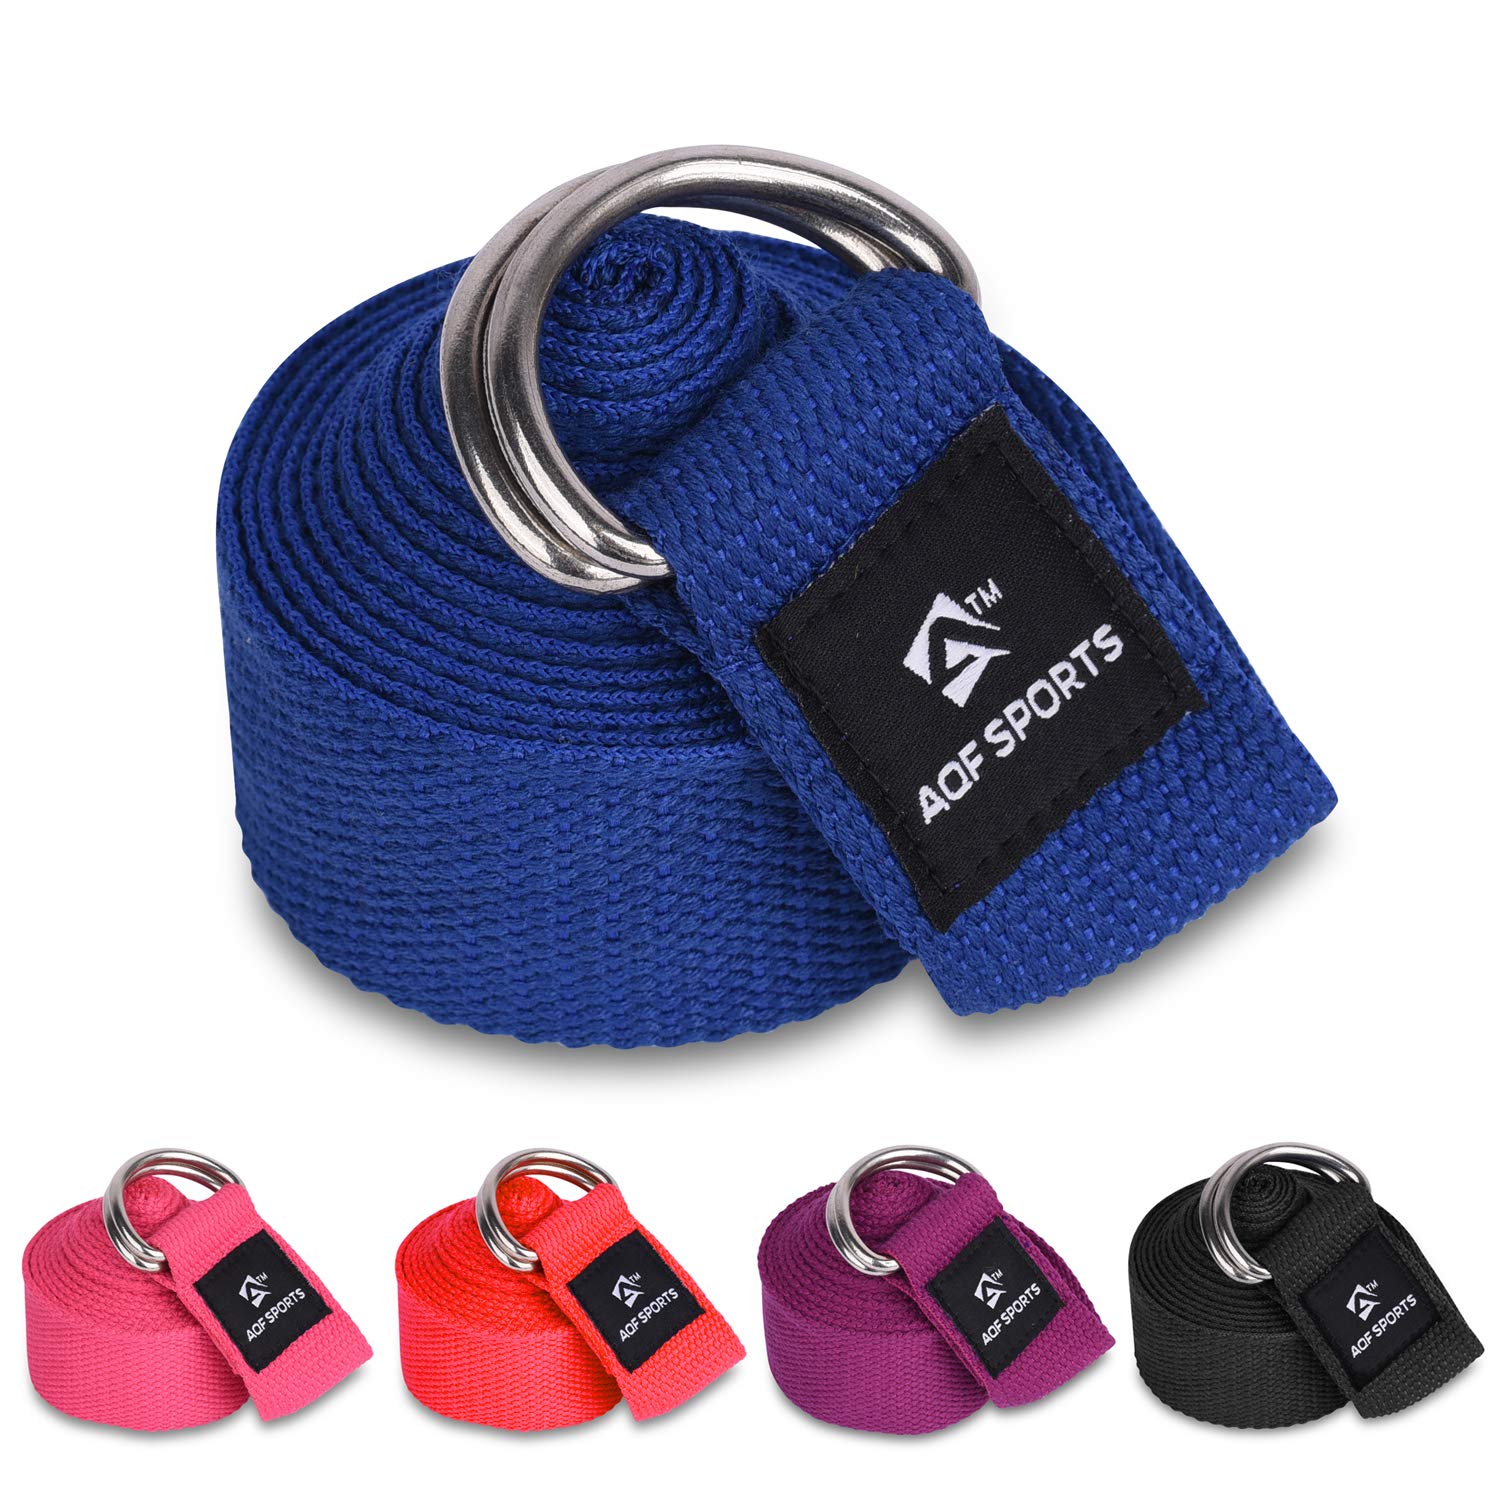 AQF Yoga Strap 1.8M, 2.4M, 3M Soft Cotton Leg Stretcher with D-Ring Buckle Adjustable Fitness Belt for Leg Stretching & Body Stretch Band